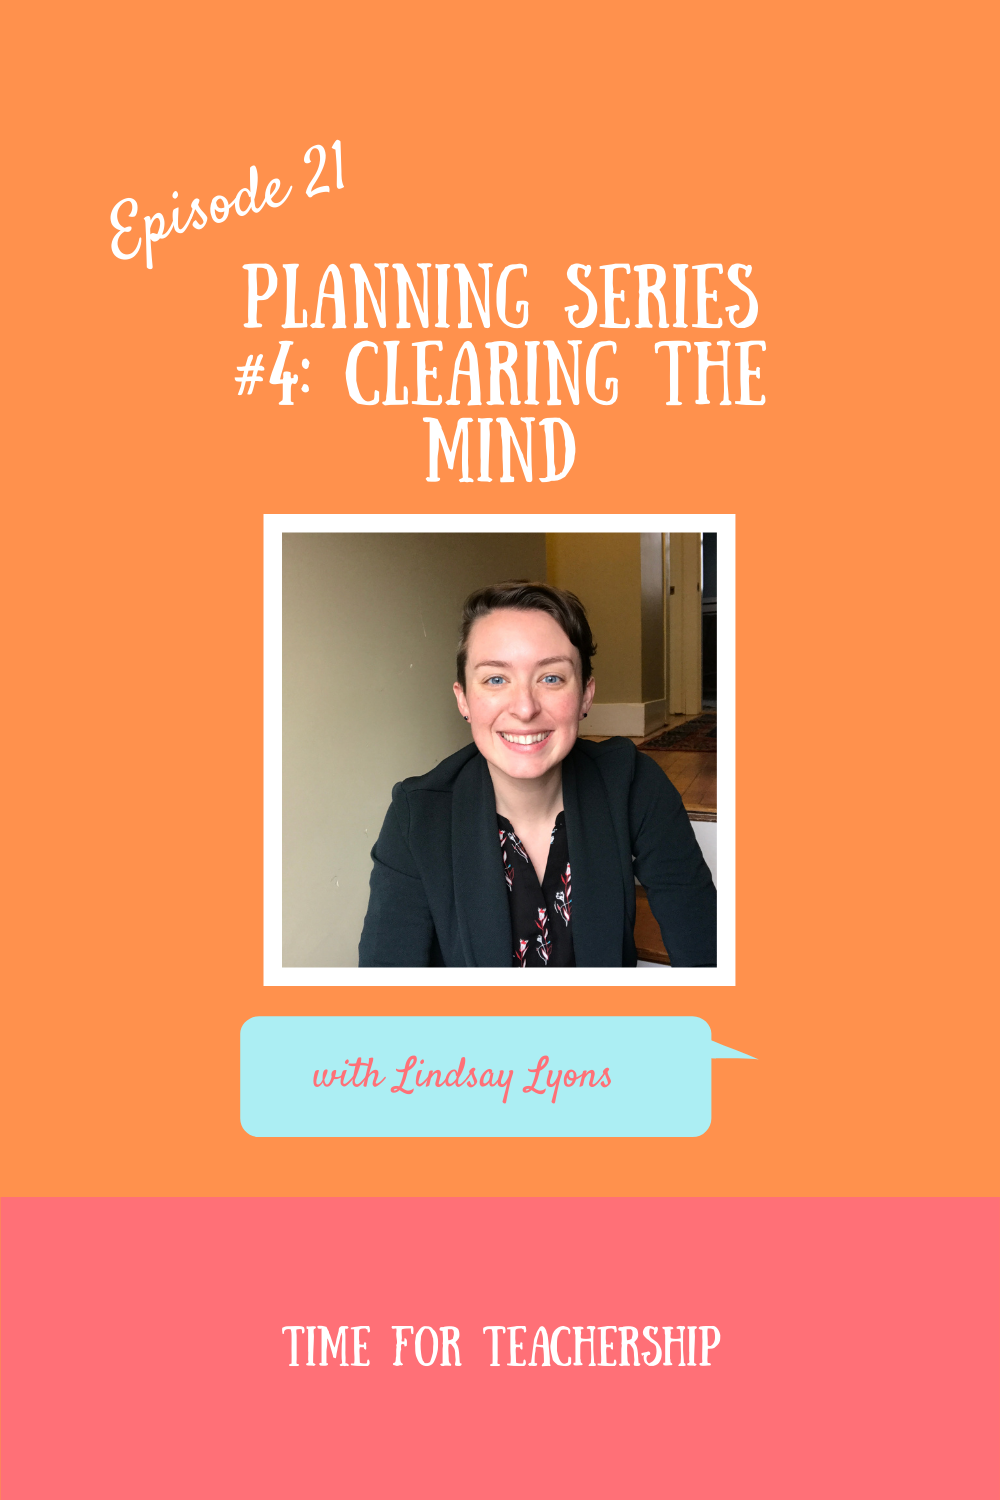 21. Planning Series Part 4: Clearing the Mind. In part 4 of the Planning series, we are clearing out the clutter that takes up too much valuable space in our minds and instead creating a system that we can keep track of. Check out the Time for Teachership blog post to get some mental clarity. For more tips and #teacherfreebies, sign up for weekly emails at bit.ly/lindsayletter